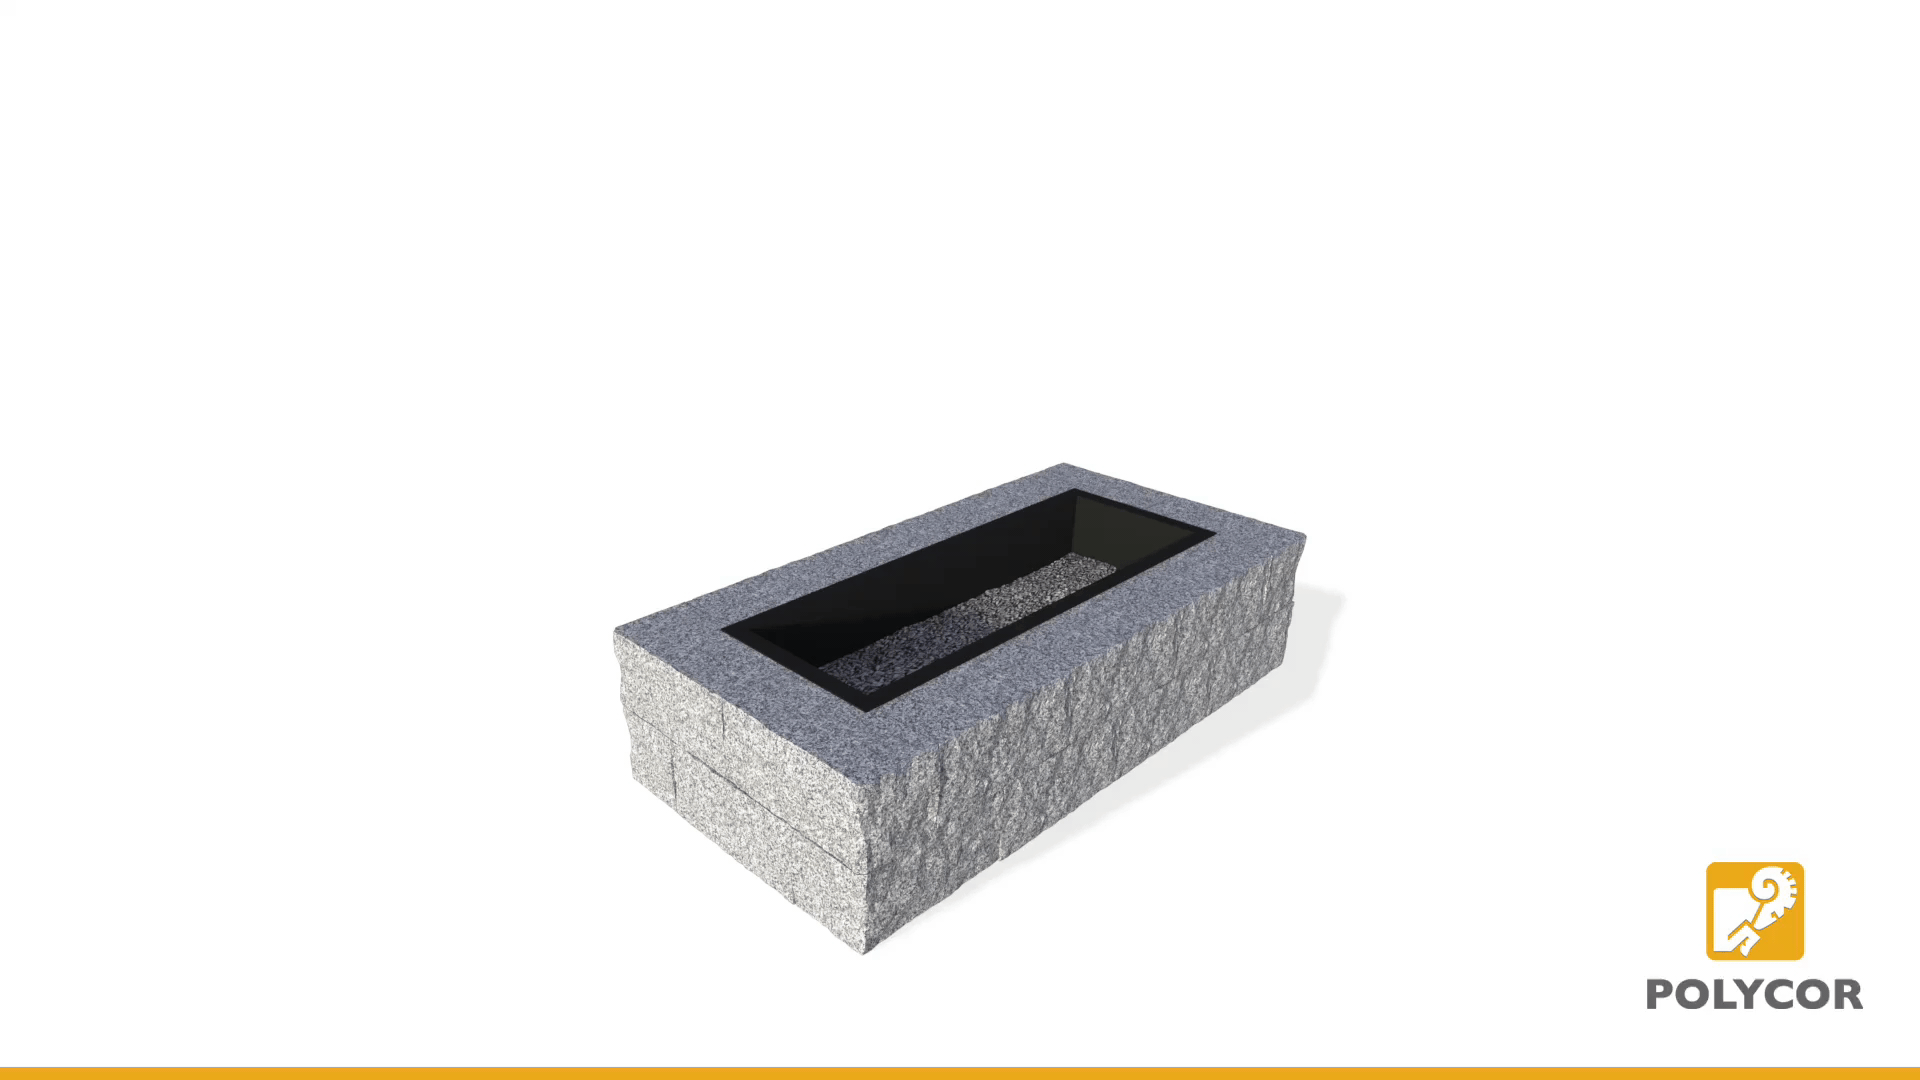 Polycor-Granite-Natural-Stone-Fire-Pit-Installation-Instructions